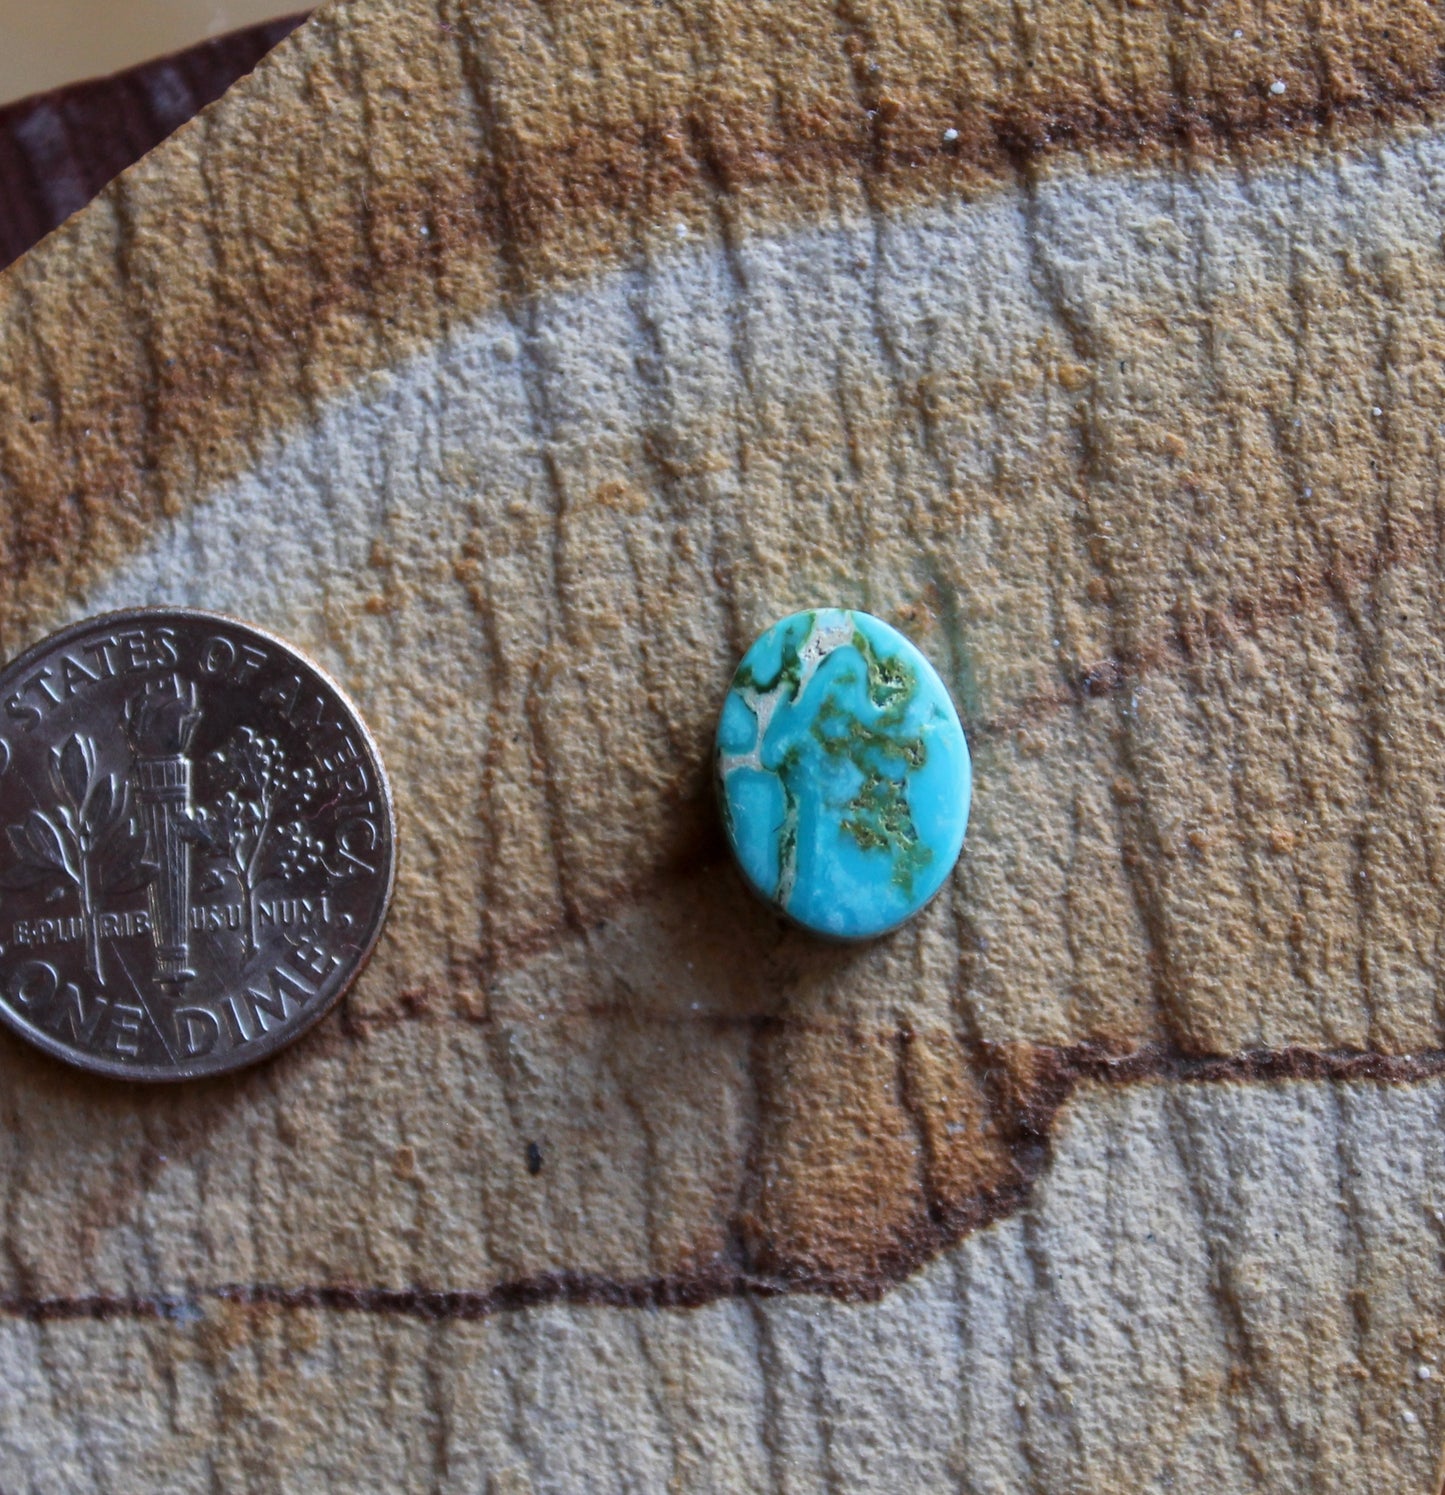 5 carat oval blue Stone Mountain Turquoise cabochon with a flat top